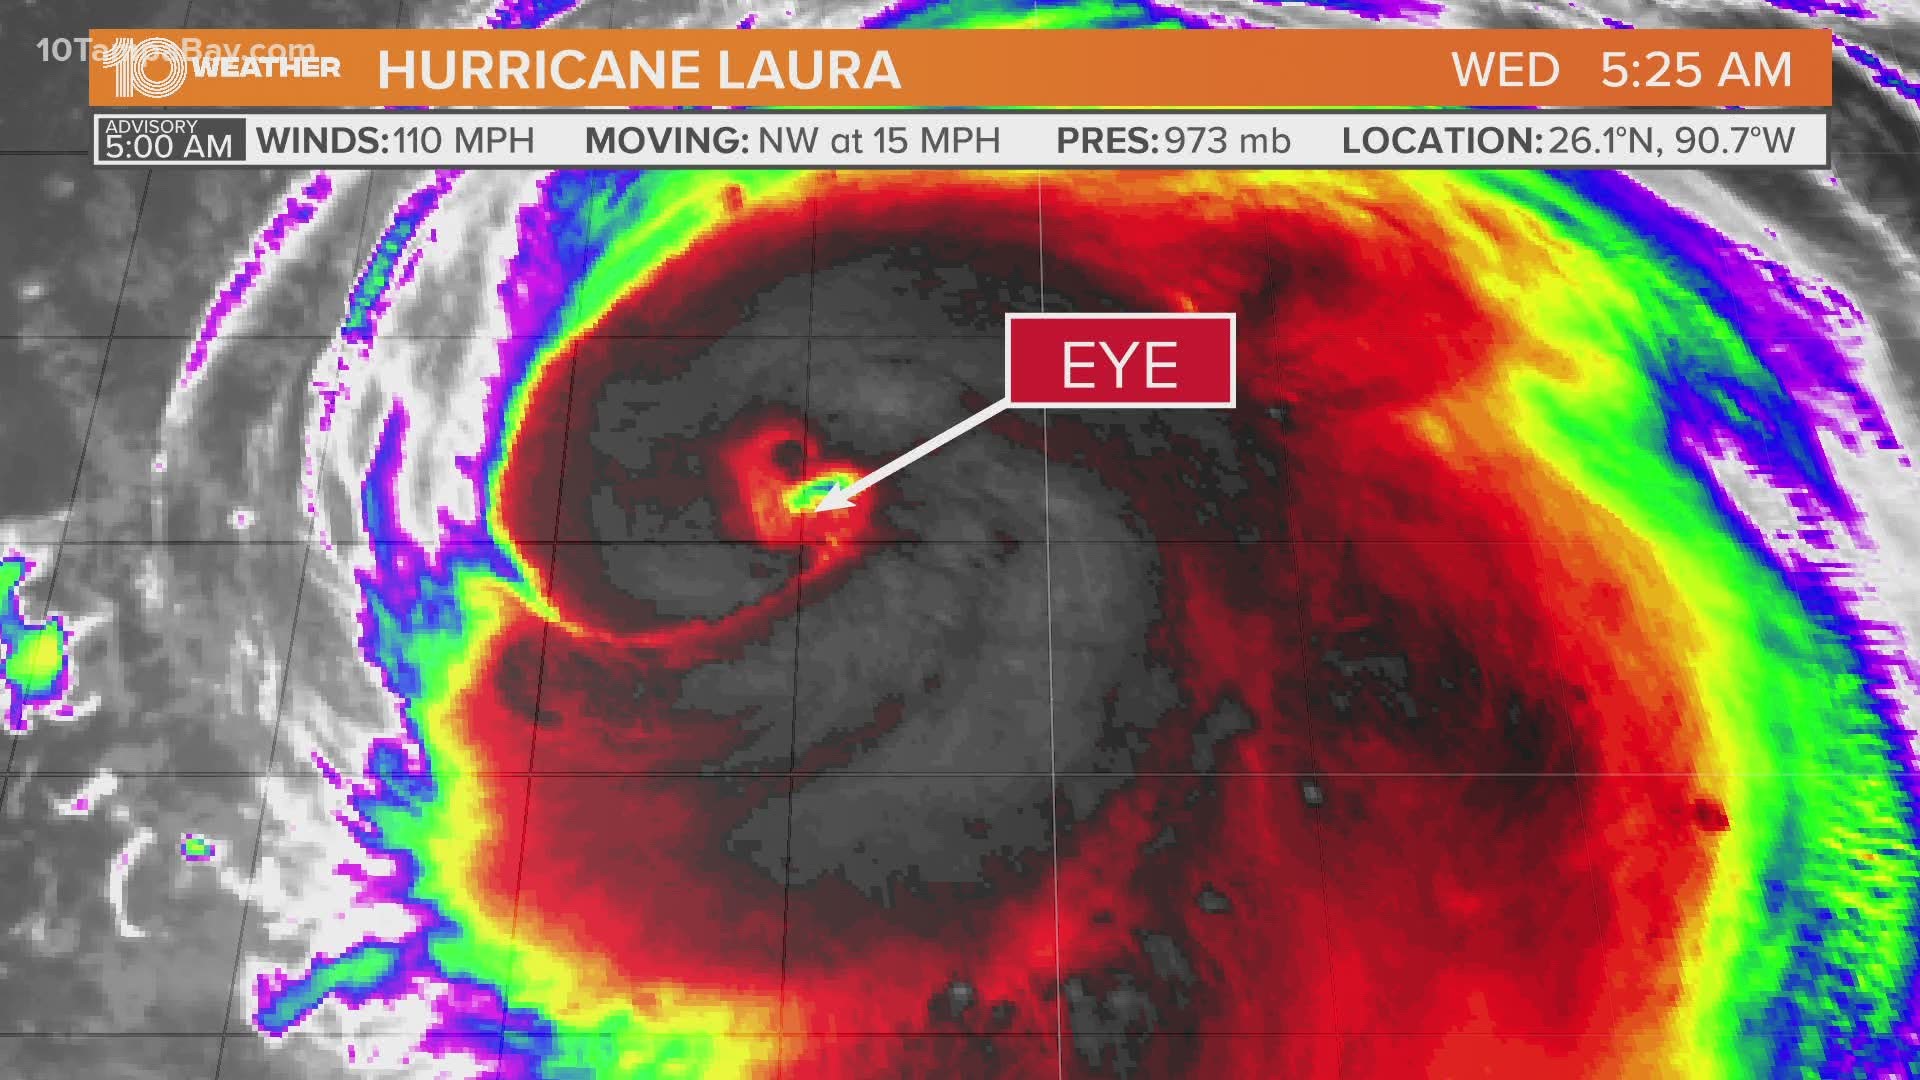 Hurricane Laura is forecast to produce life-threatening storm surge, extreme winds and flash flooding over eastern Texas and Louisiana.